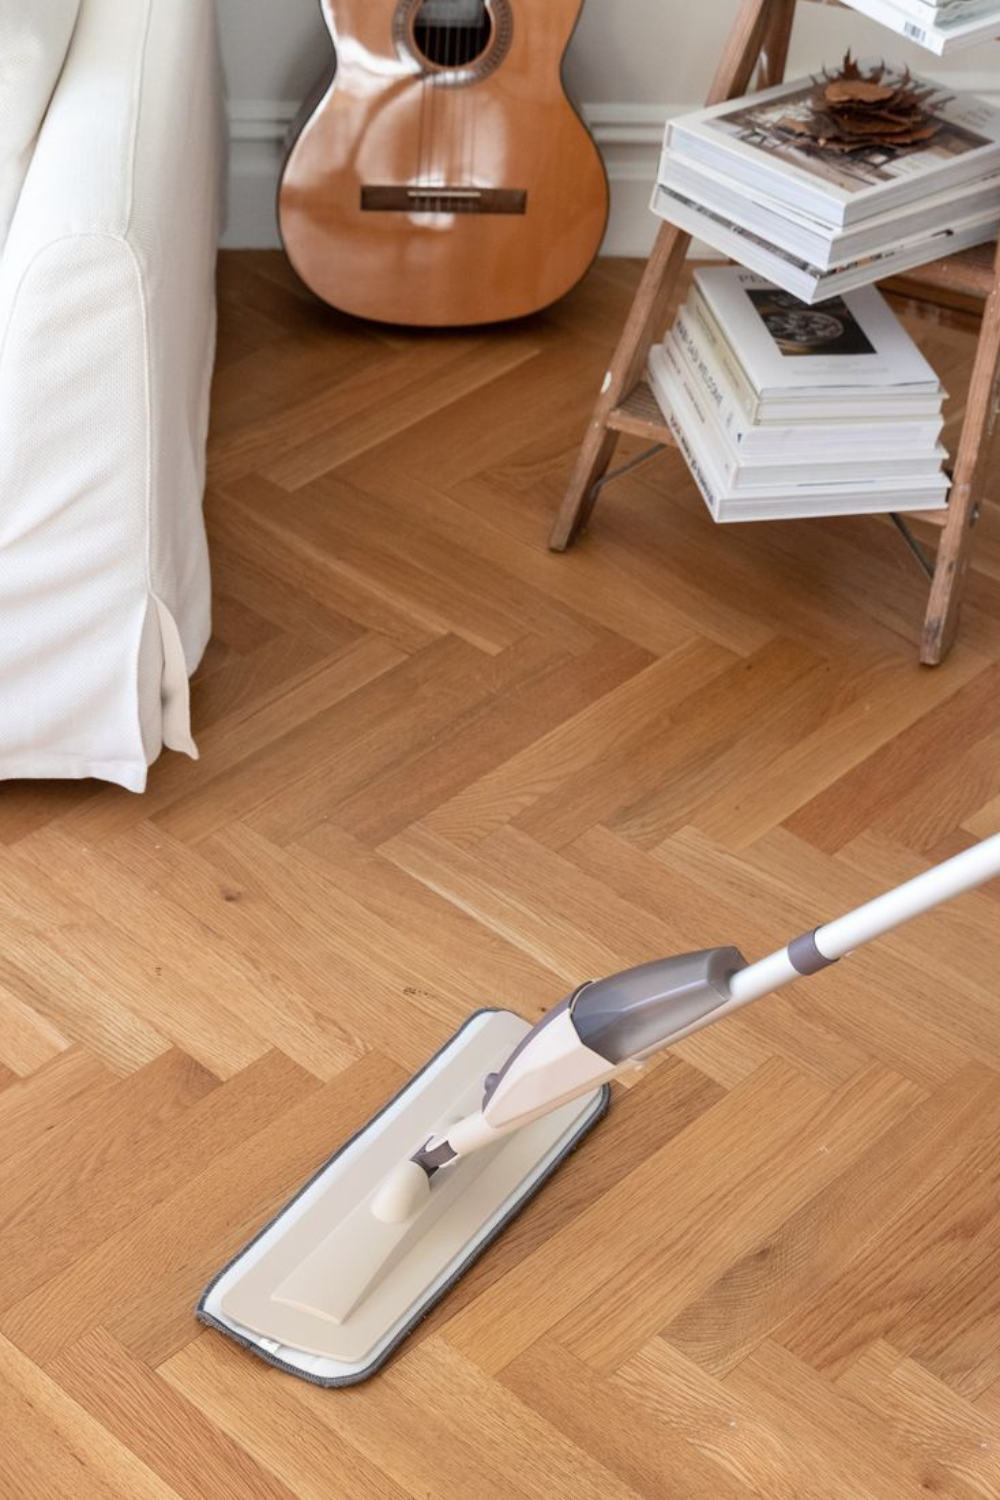 Safe and Non-Toxic Cleaning for Baby's Nursery: Eco-Friendly Solutions for Wooden Floors and More